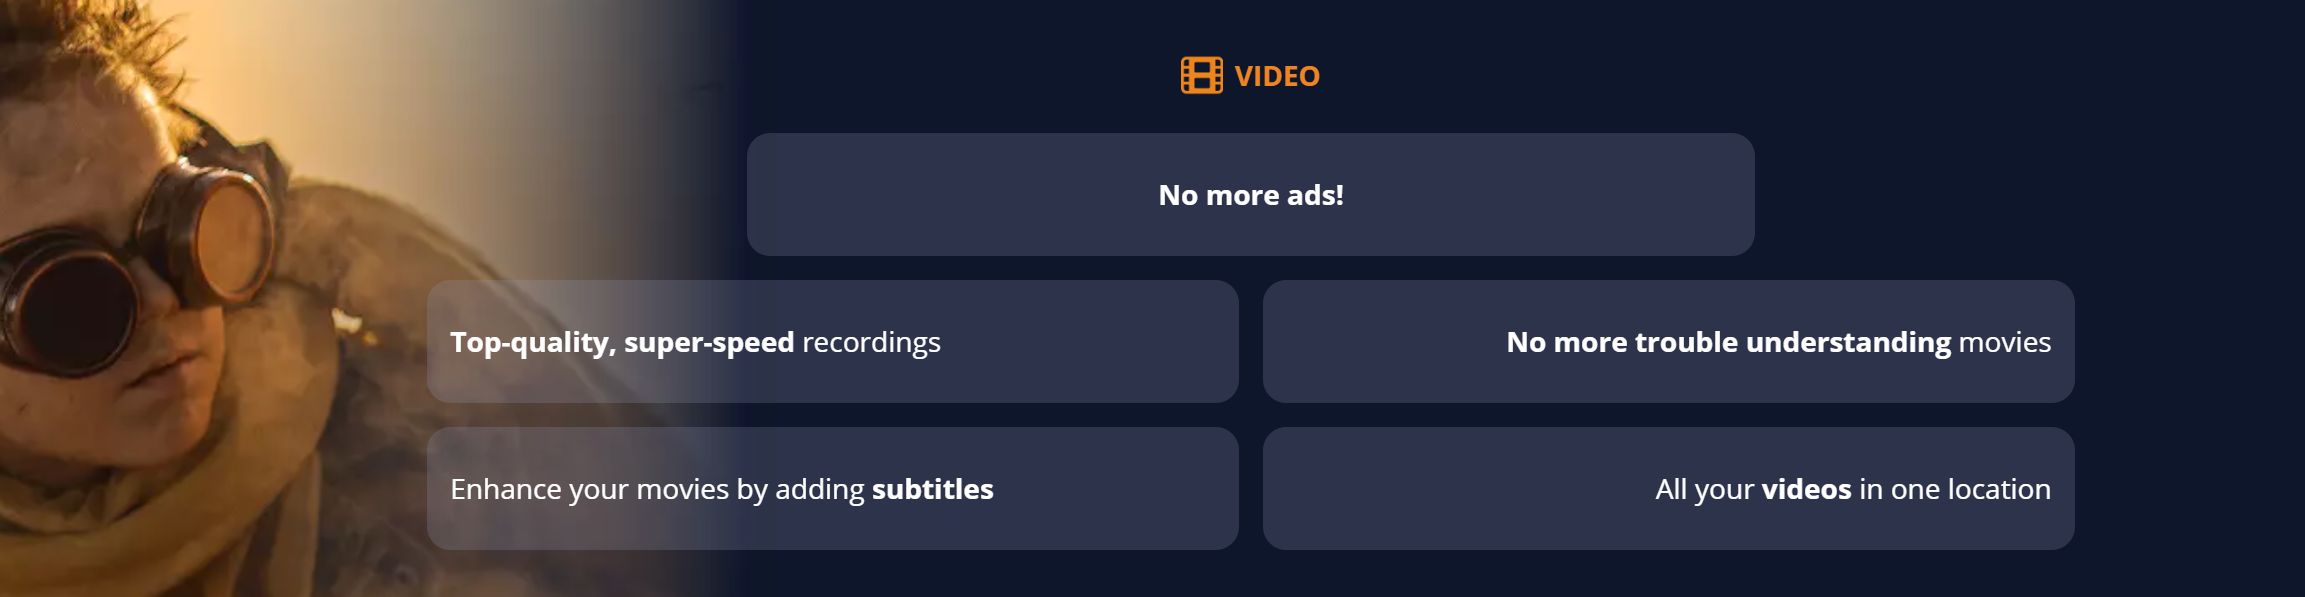 Video Streaming: Audials 2022 video recording using the internal player –  Audials Support